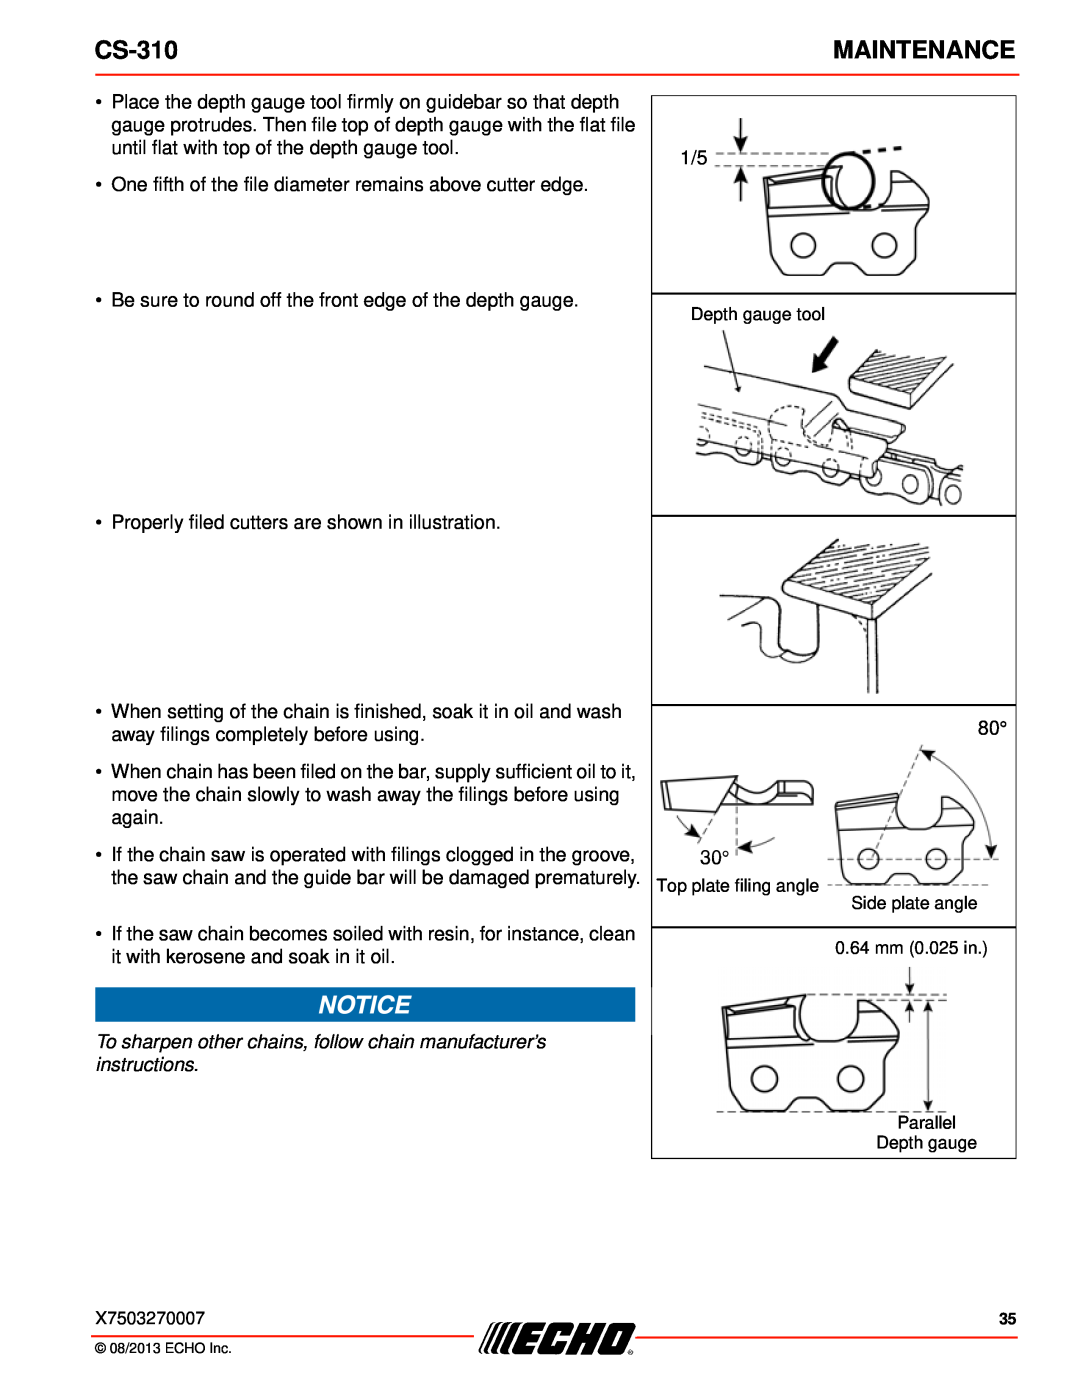 Echo CS-310 instruction manual Maintenance, Properly filed cutters are shown in illustration 